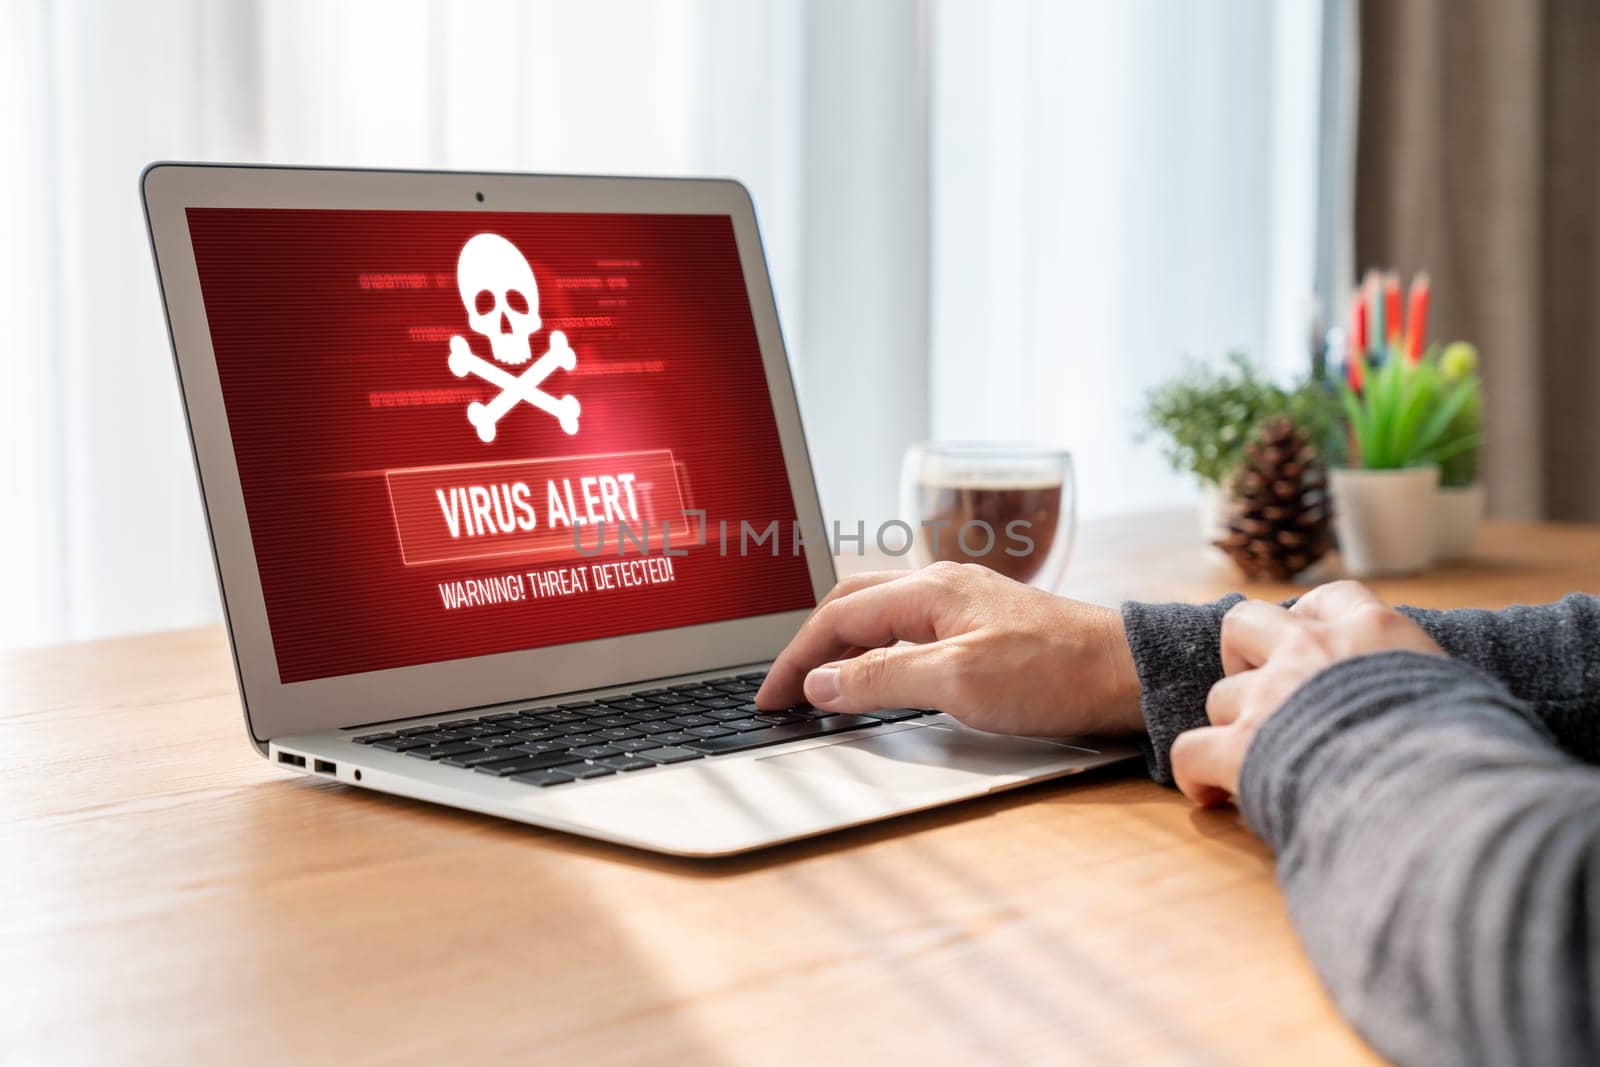 Virus warning alert on computer screen detected modish cyber threat by biancoblue